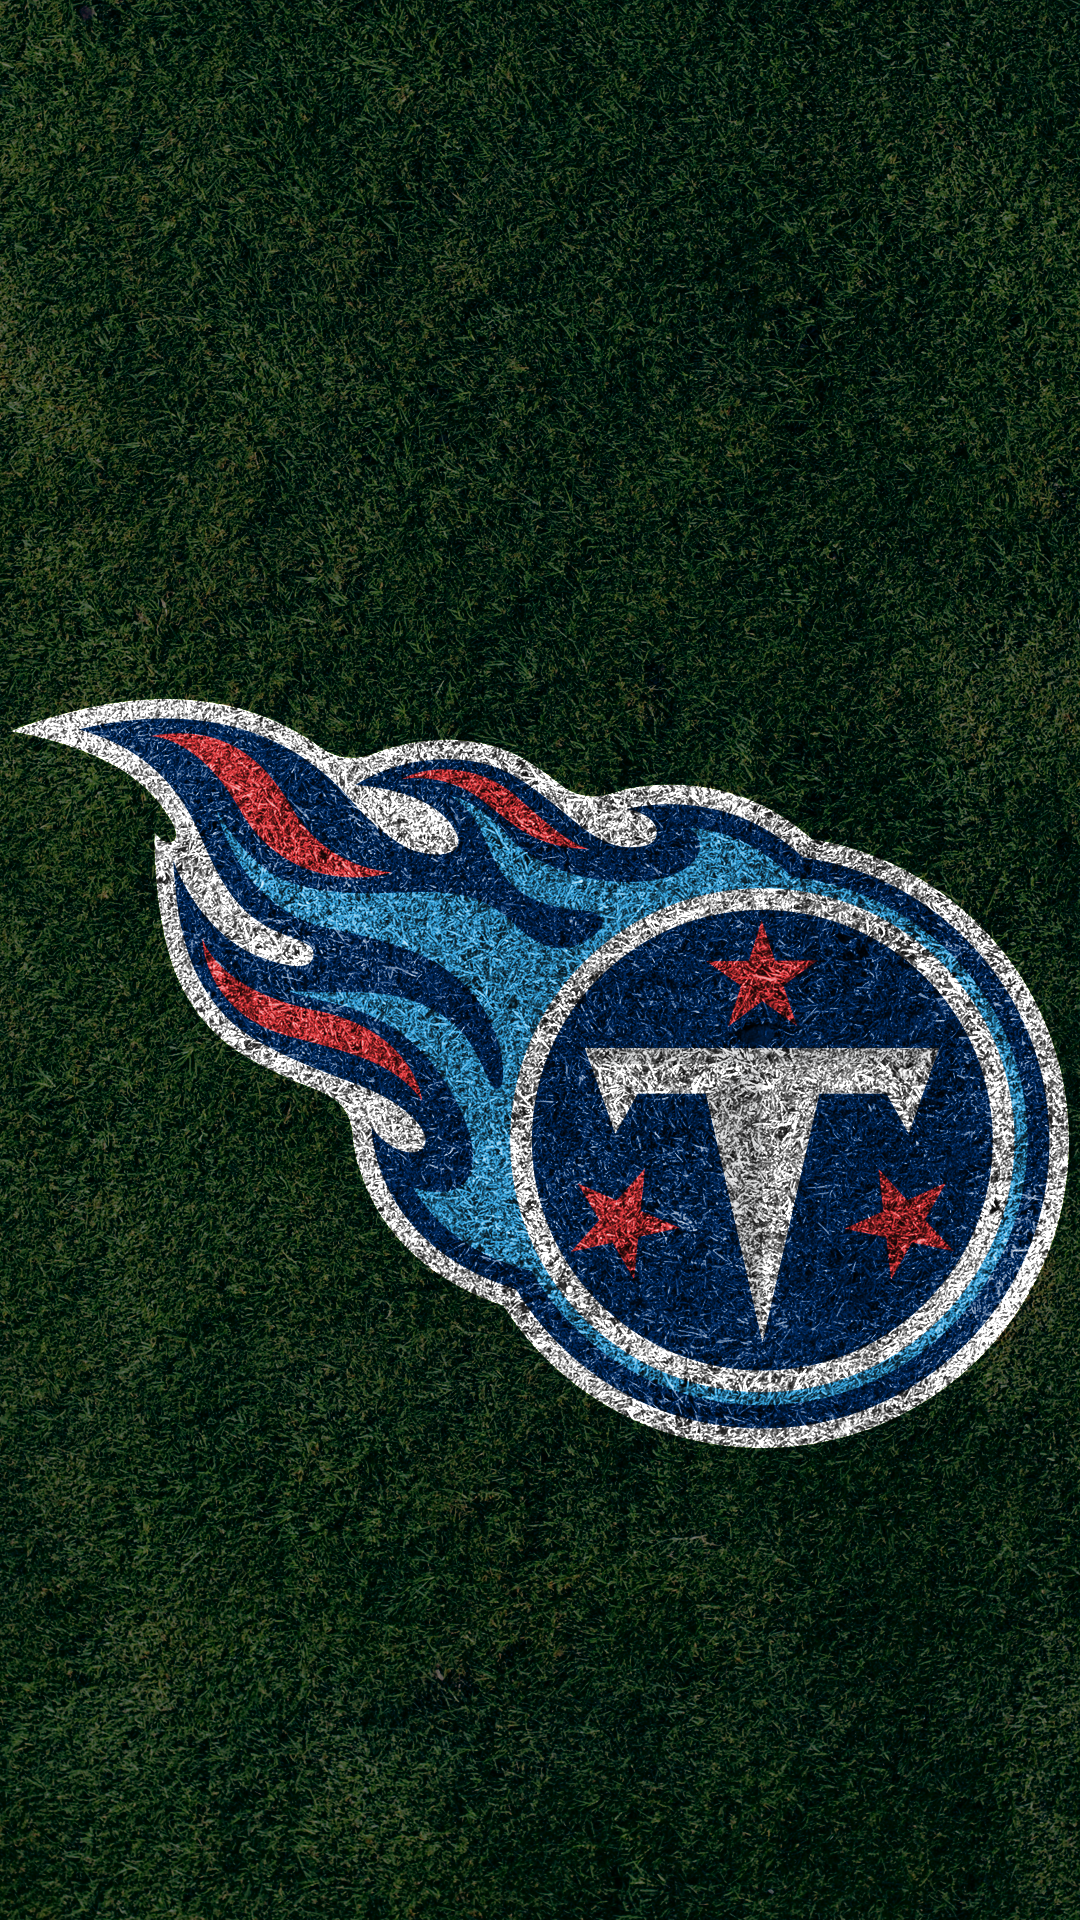 Tennessee Titans wallpaper by Xwalls  Download on ZEDGE  620e